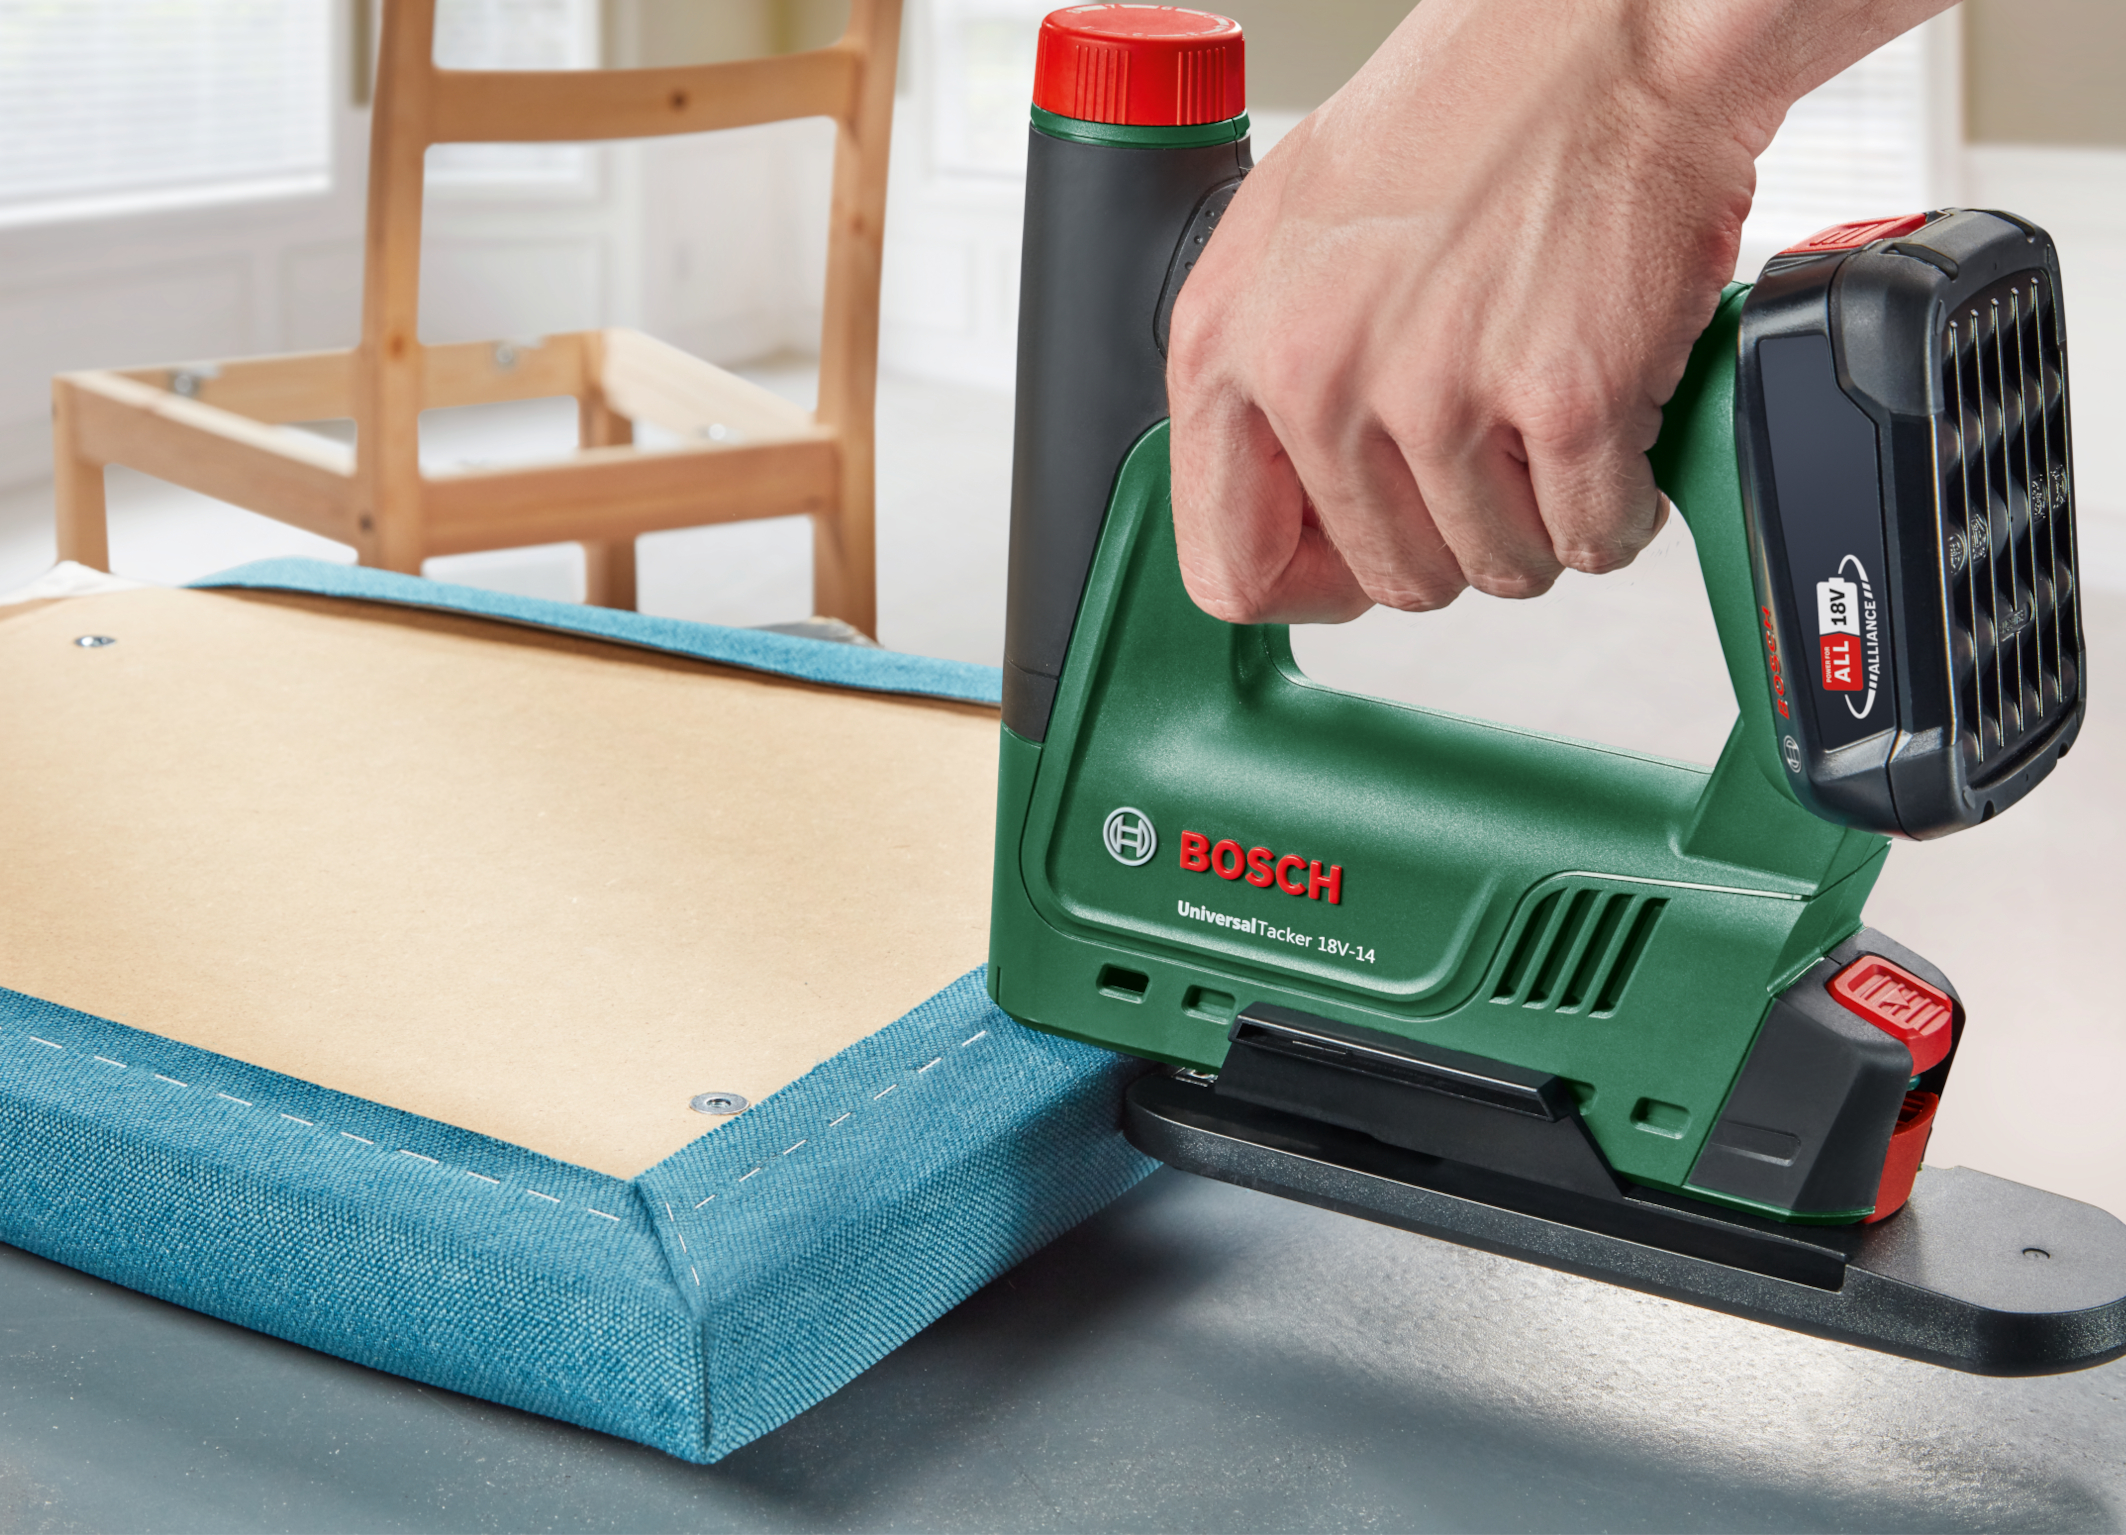 Bully balkon Dat Powerful addition to the '18V Power for All System': First 18V cordless  tacker from Bosch for DIYers - Bosch Media Service